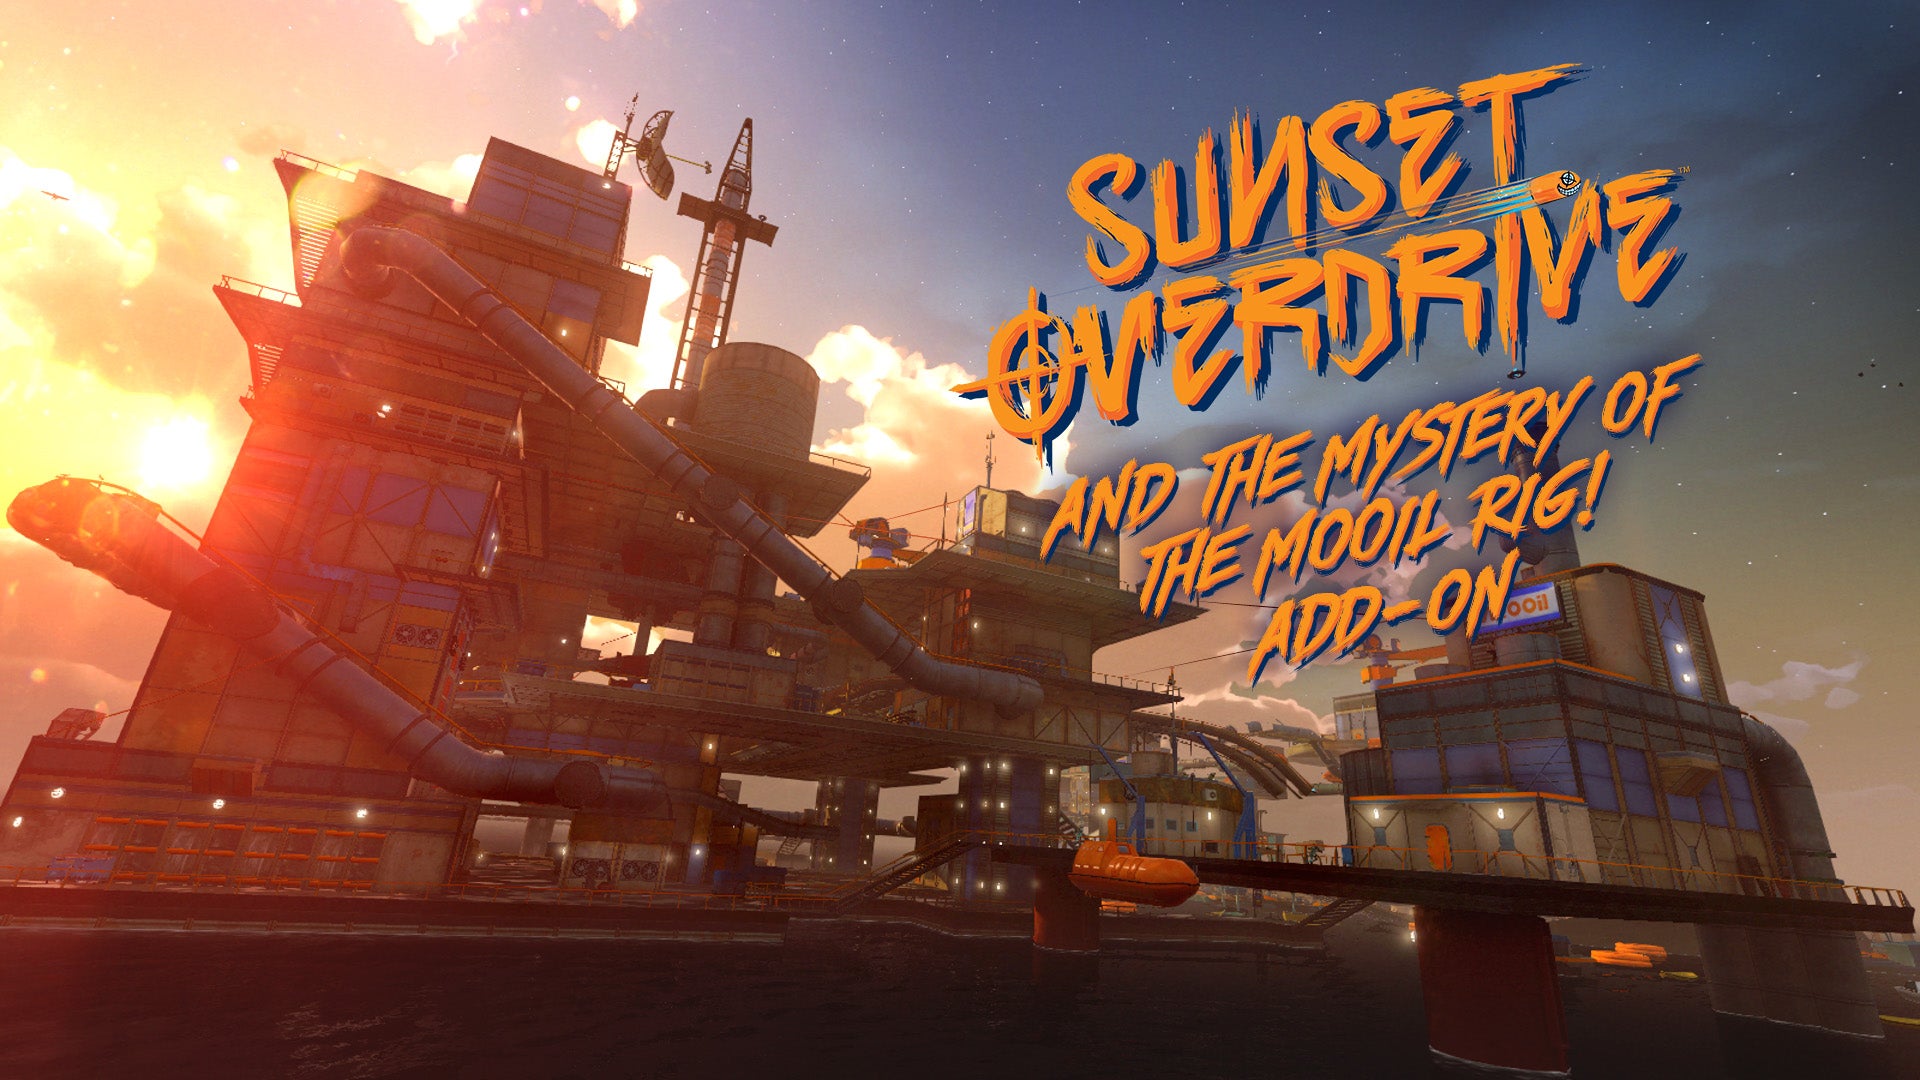 Image for Mooil Rig DLC hits Sunset Overdrive later this month 